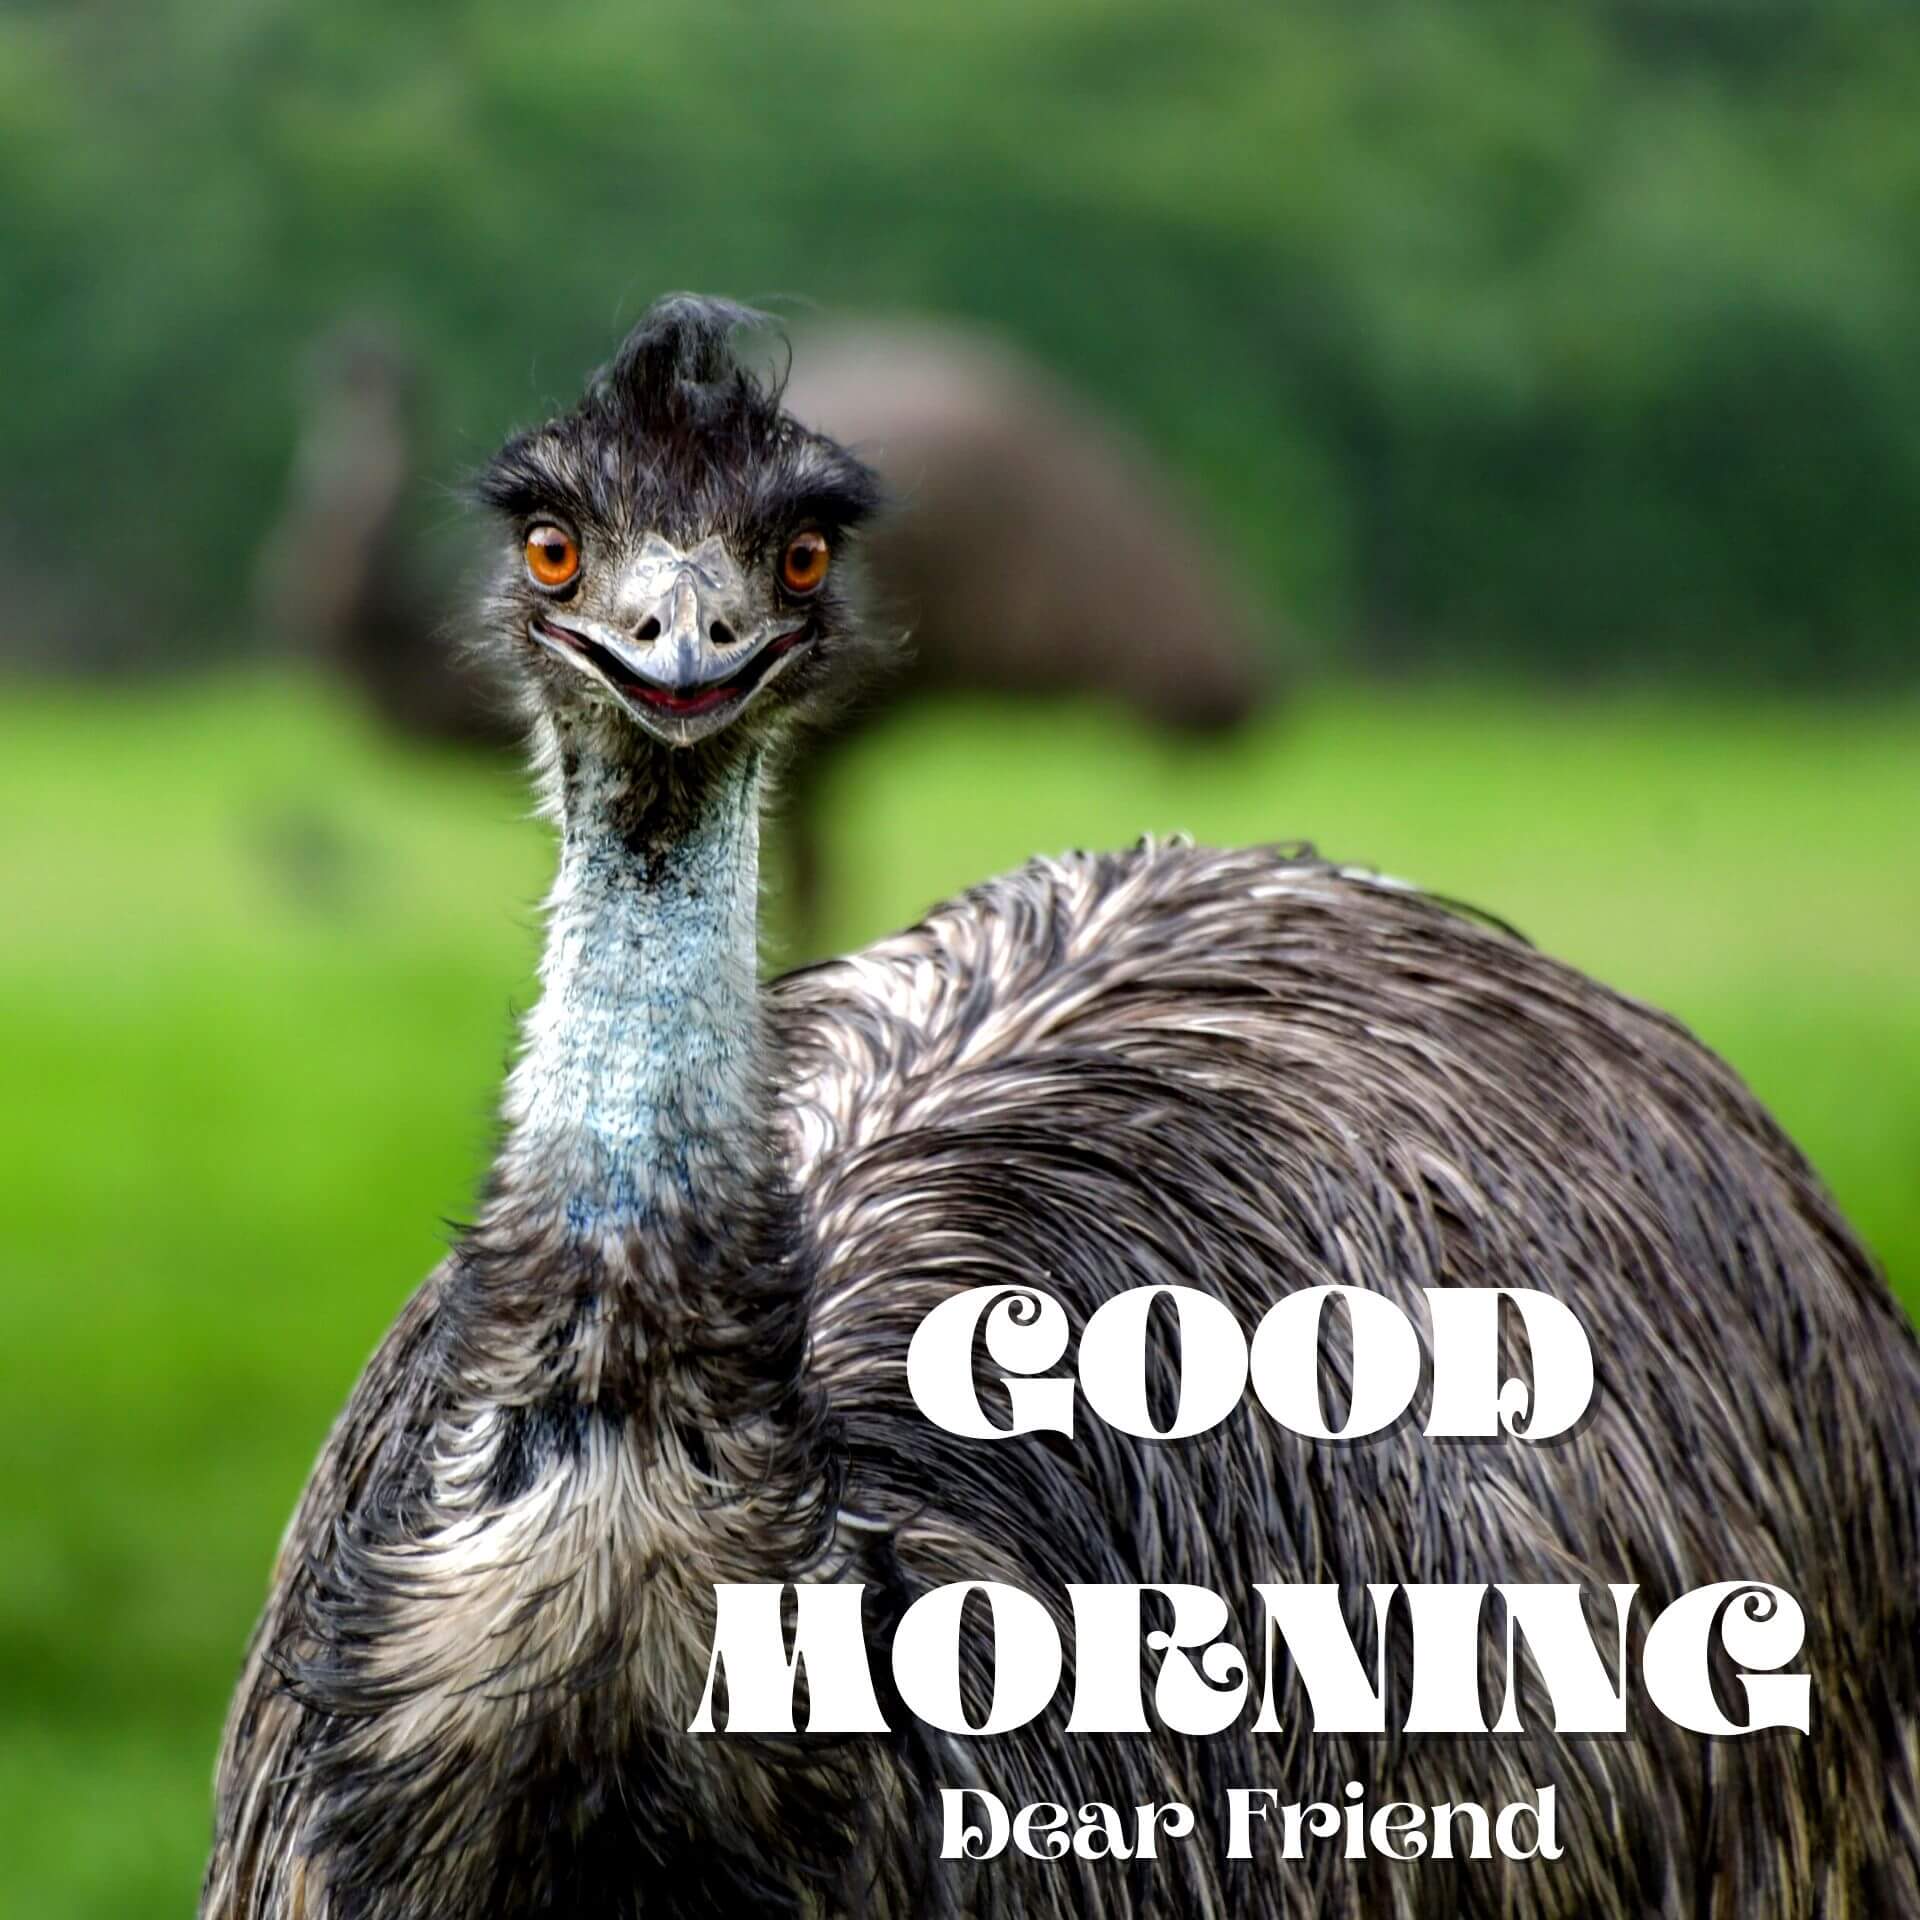 New Fresh Good Morning 1080p Images Download